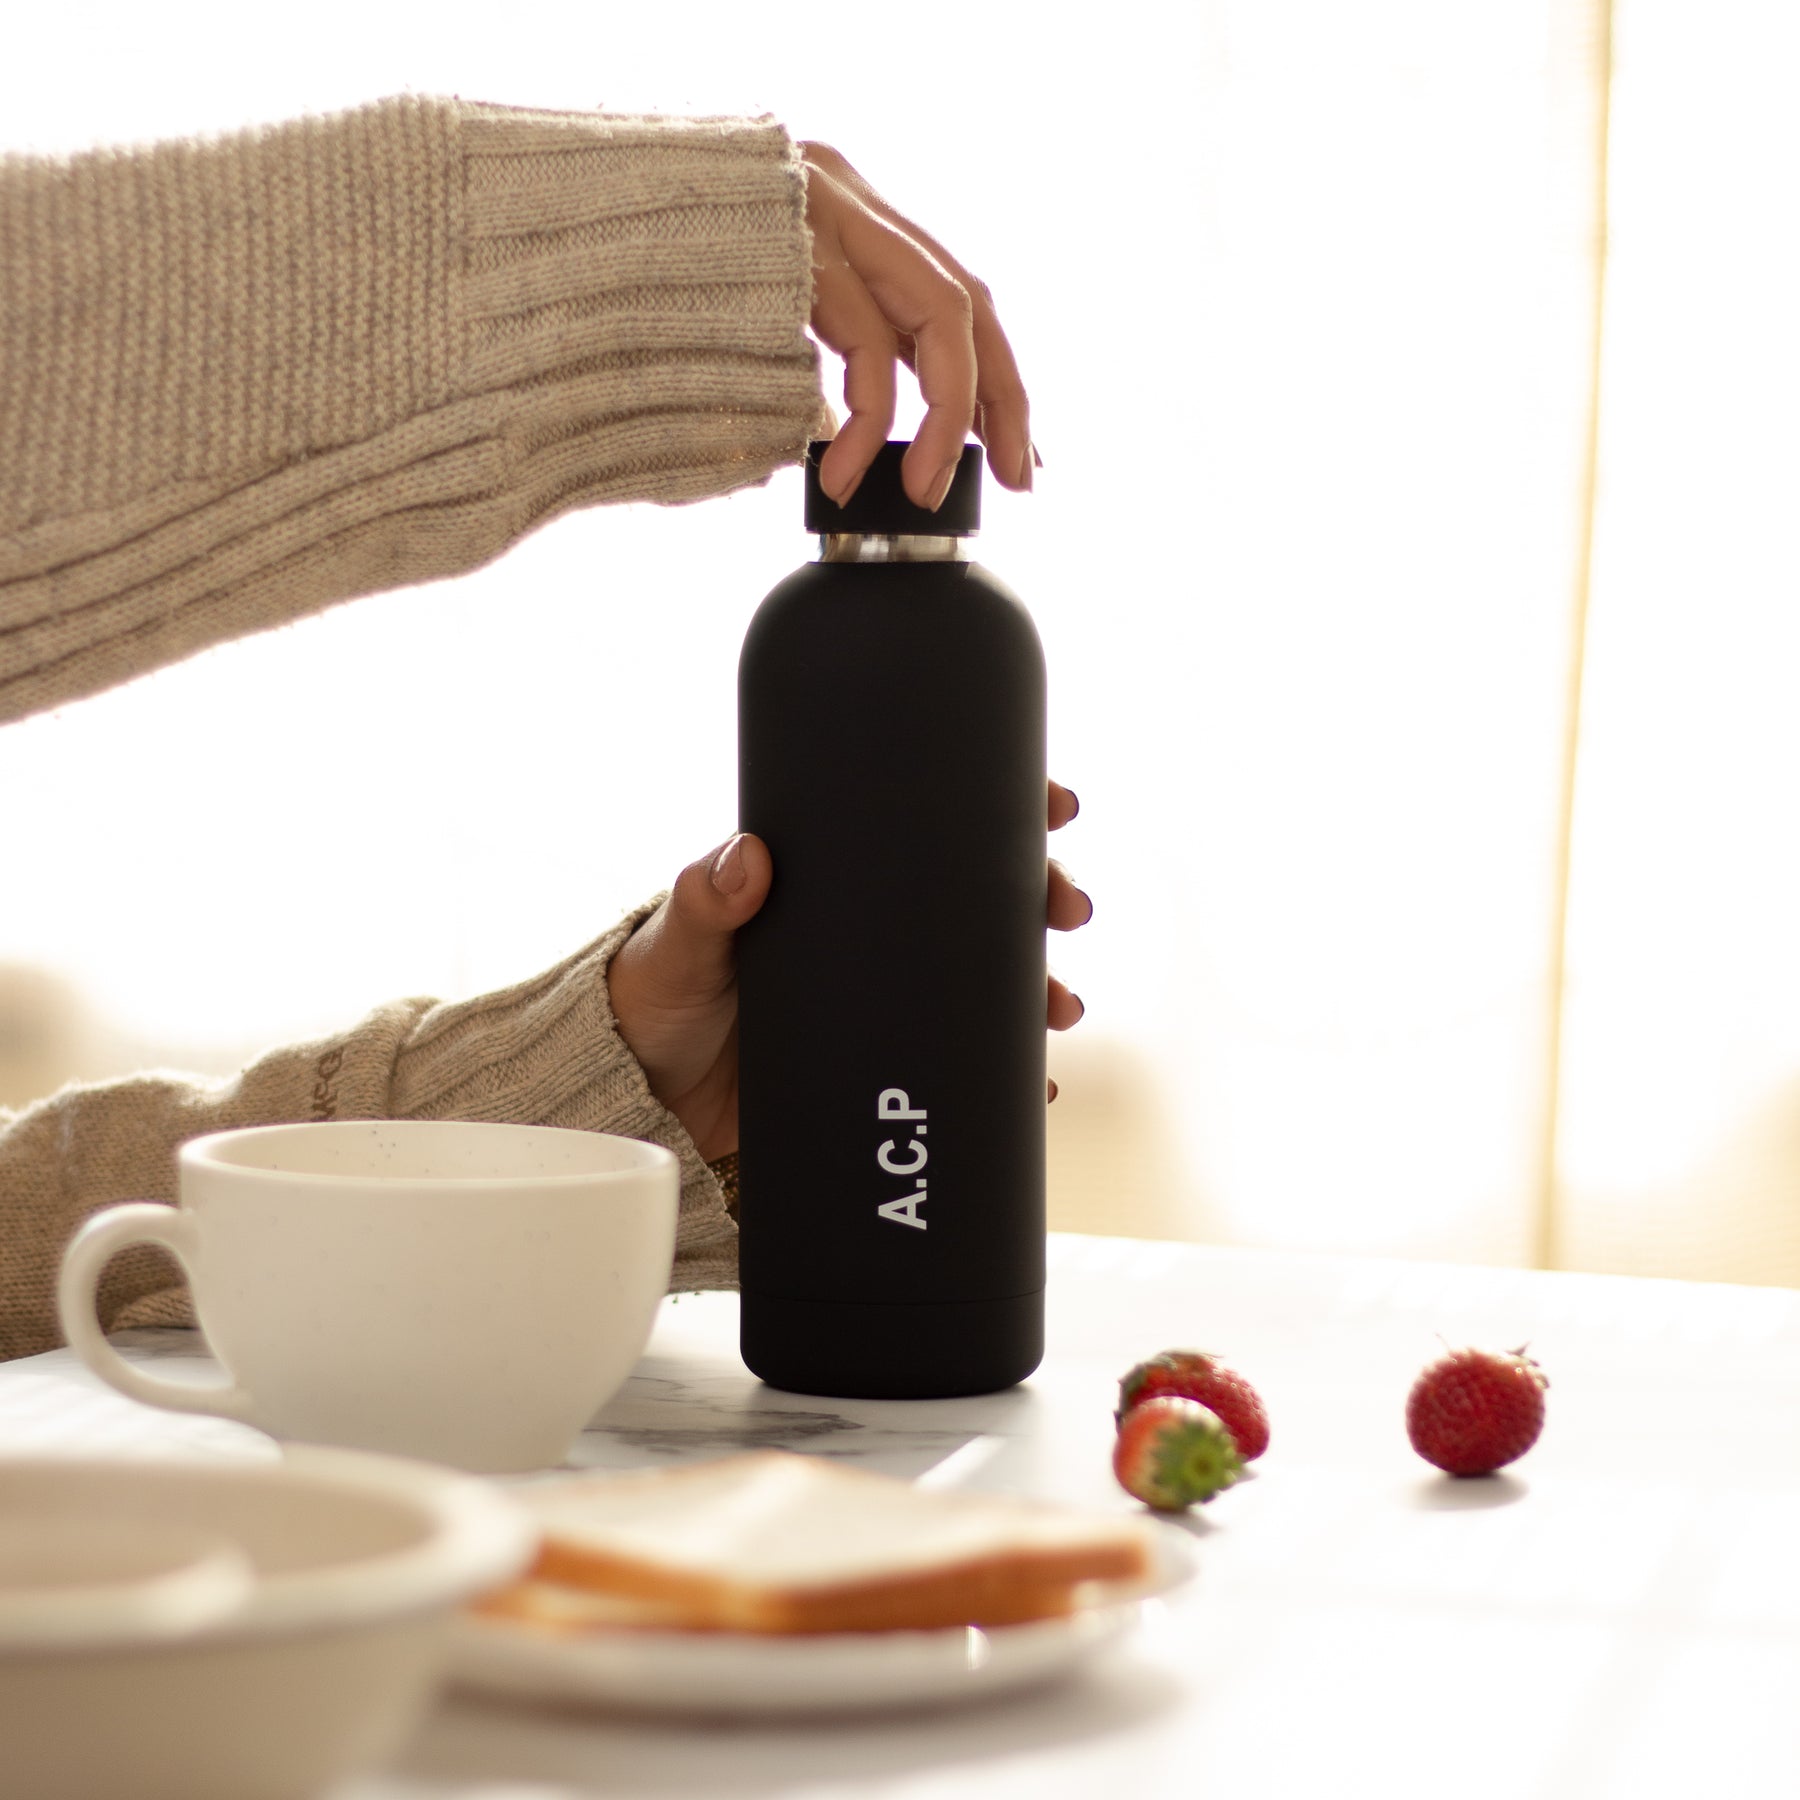 Quench - Personalised Water Bottle - Black